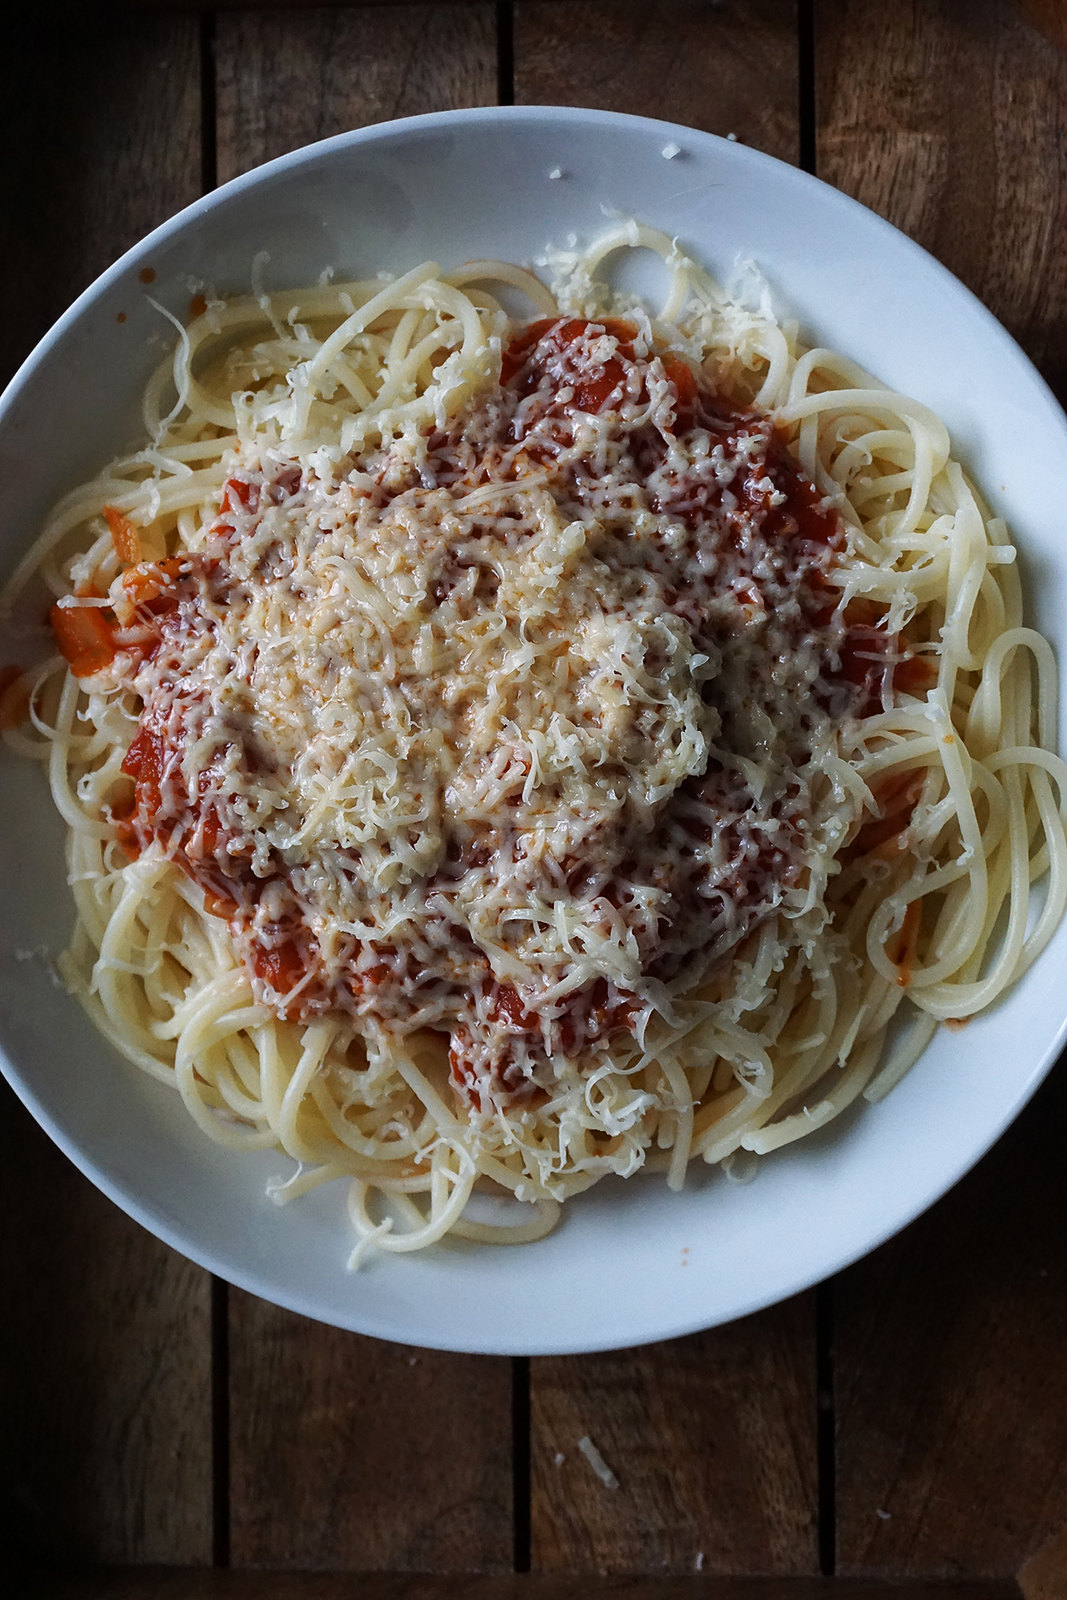 Gluten free spaghetti with a basic tomato sauce and cheese